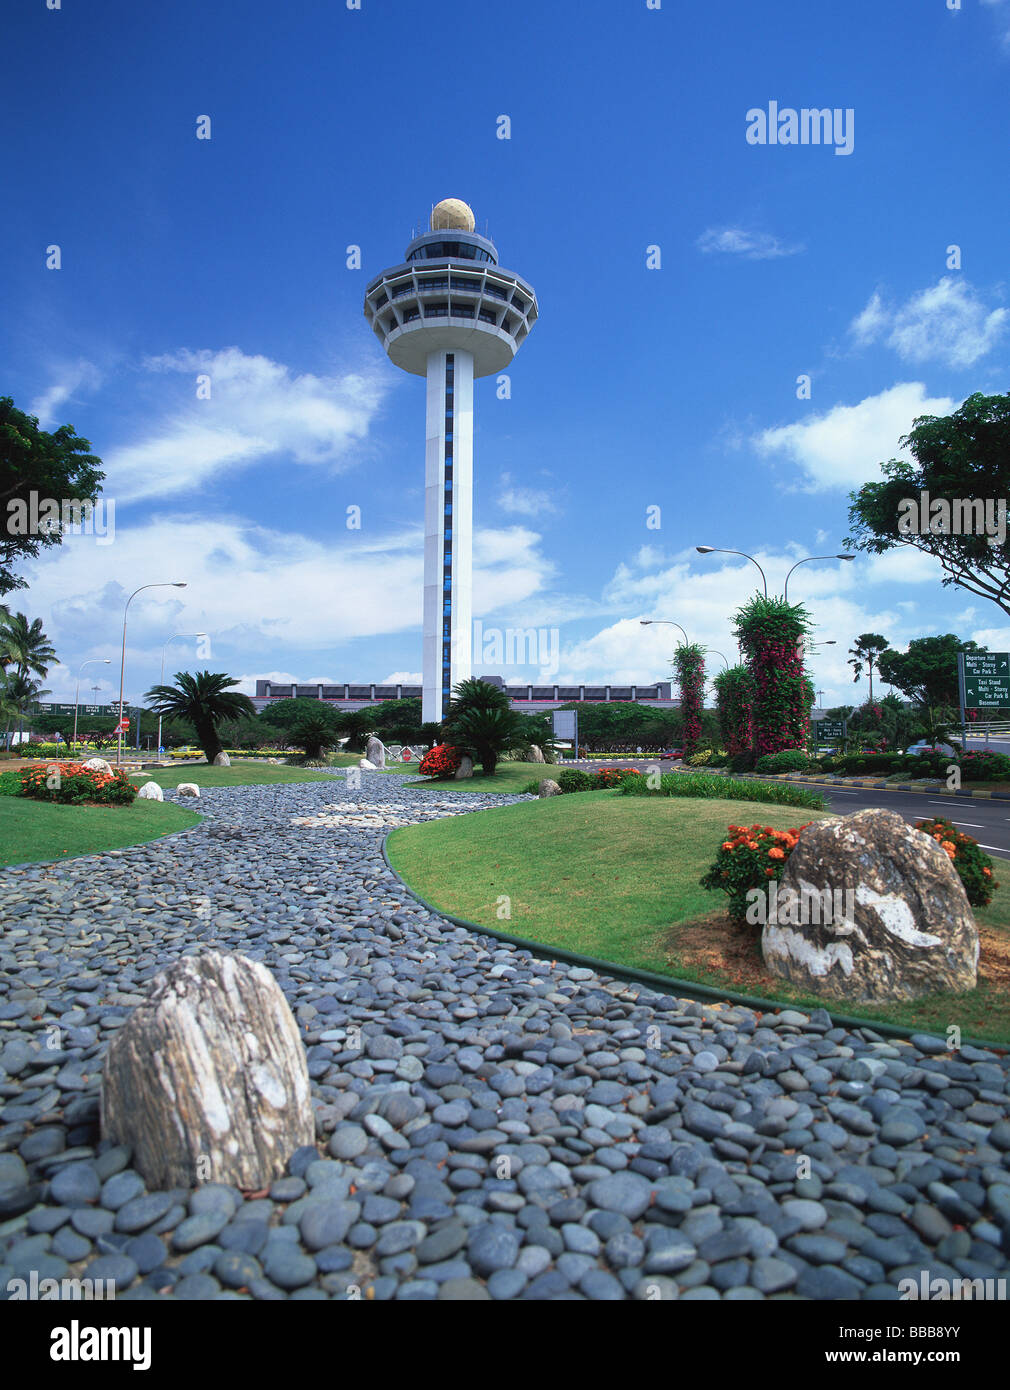 Singapore, Changi Airport, garden with control tower Stock Photo